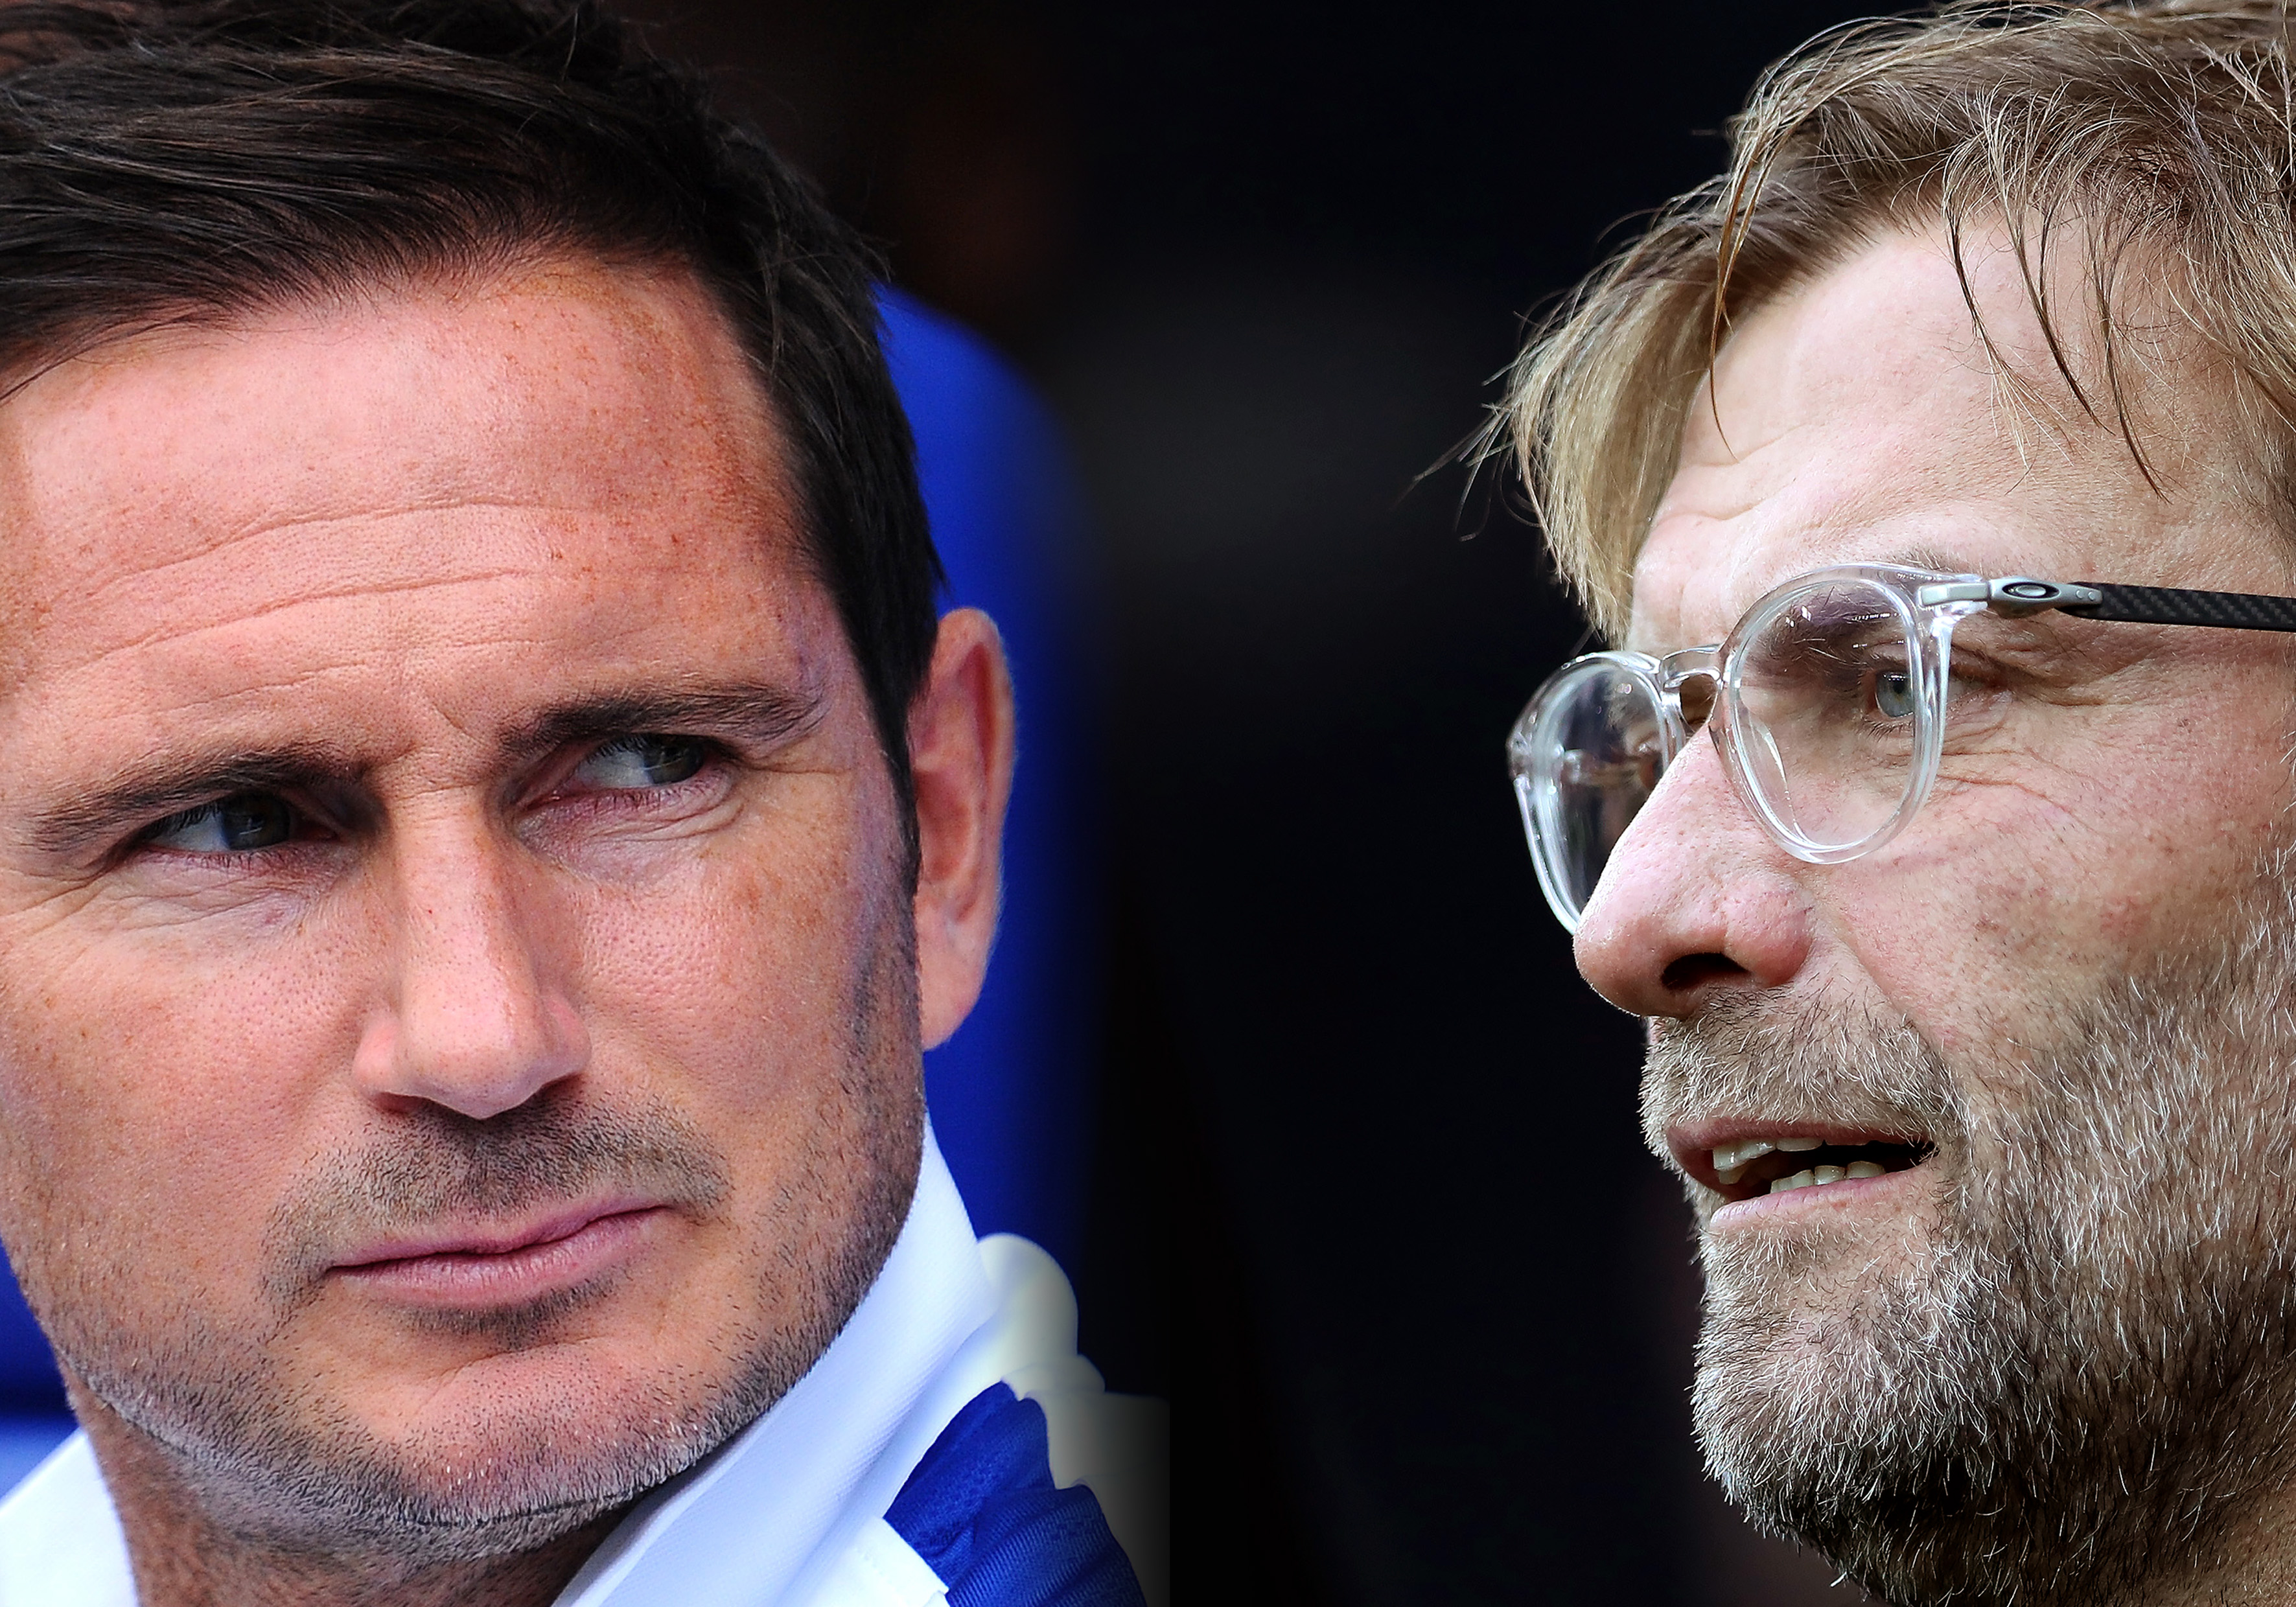 FILE PHOTO (EDITORS NOTE: COMPOSITE OF IMAGES - Image numbers 1164744790,856402376 - GRADIENT ADDED) In this composite image a comparison has been made between Frank Lampard, Manager of Chelsea (L) and Liverpool manager Jurgen Klopp. Chelsea FC and Liverpool FC meet in the Premier League on September 22, 2019 at Stamford Bridge in London,England.  ***LEFT IMAGE***  READING, ENGLAND - JULY 28: Frank Lampard, Manager of Chelsea looks on prior to the Pre-Season Friendly match between Reading and Chelsea at Madejski Stadium on July 28, 2019 in Reading, England. (Photo by Alex Burstow/Getty Images) ***RIGHT IMAGE***  NEWCASTLE UPON TYNE, ENGLAND - OCTOBER 01: Liverpool manager Jurgen Klopp looks on during the Premier League match between Newcastle United and Liverpool at St. James Park on October 1, 2017 in Newcastle upon Tyne, England. (Photo by Ian MacNicol/Getty Images)